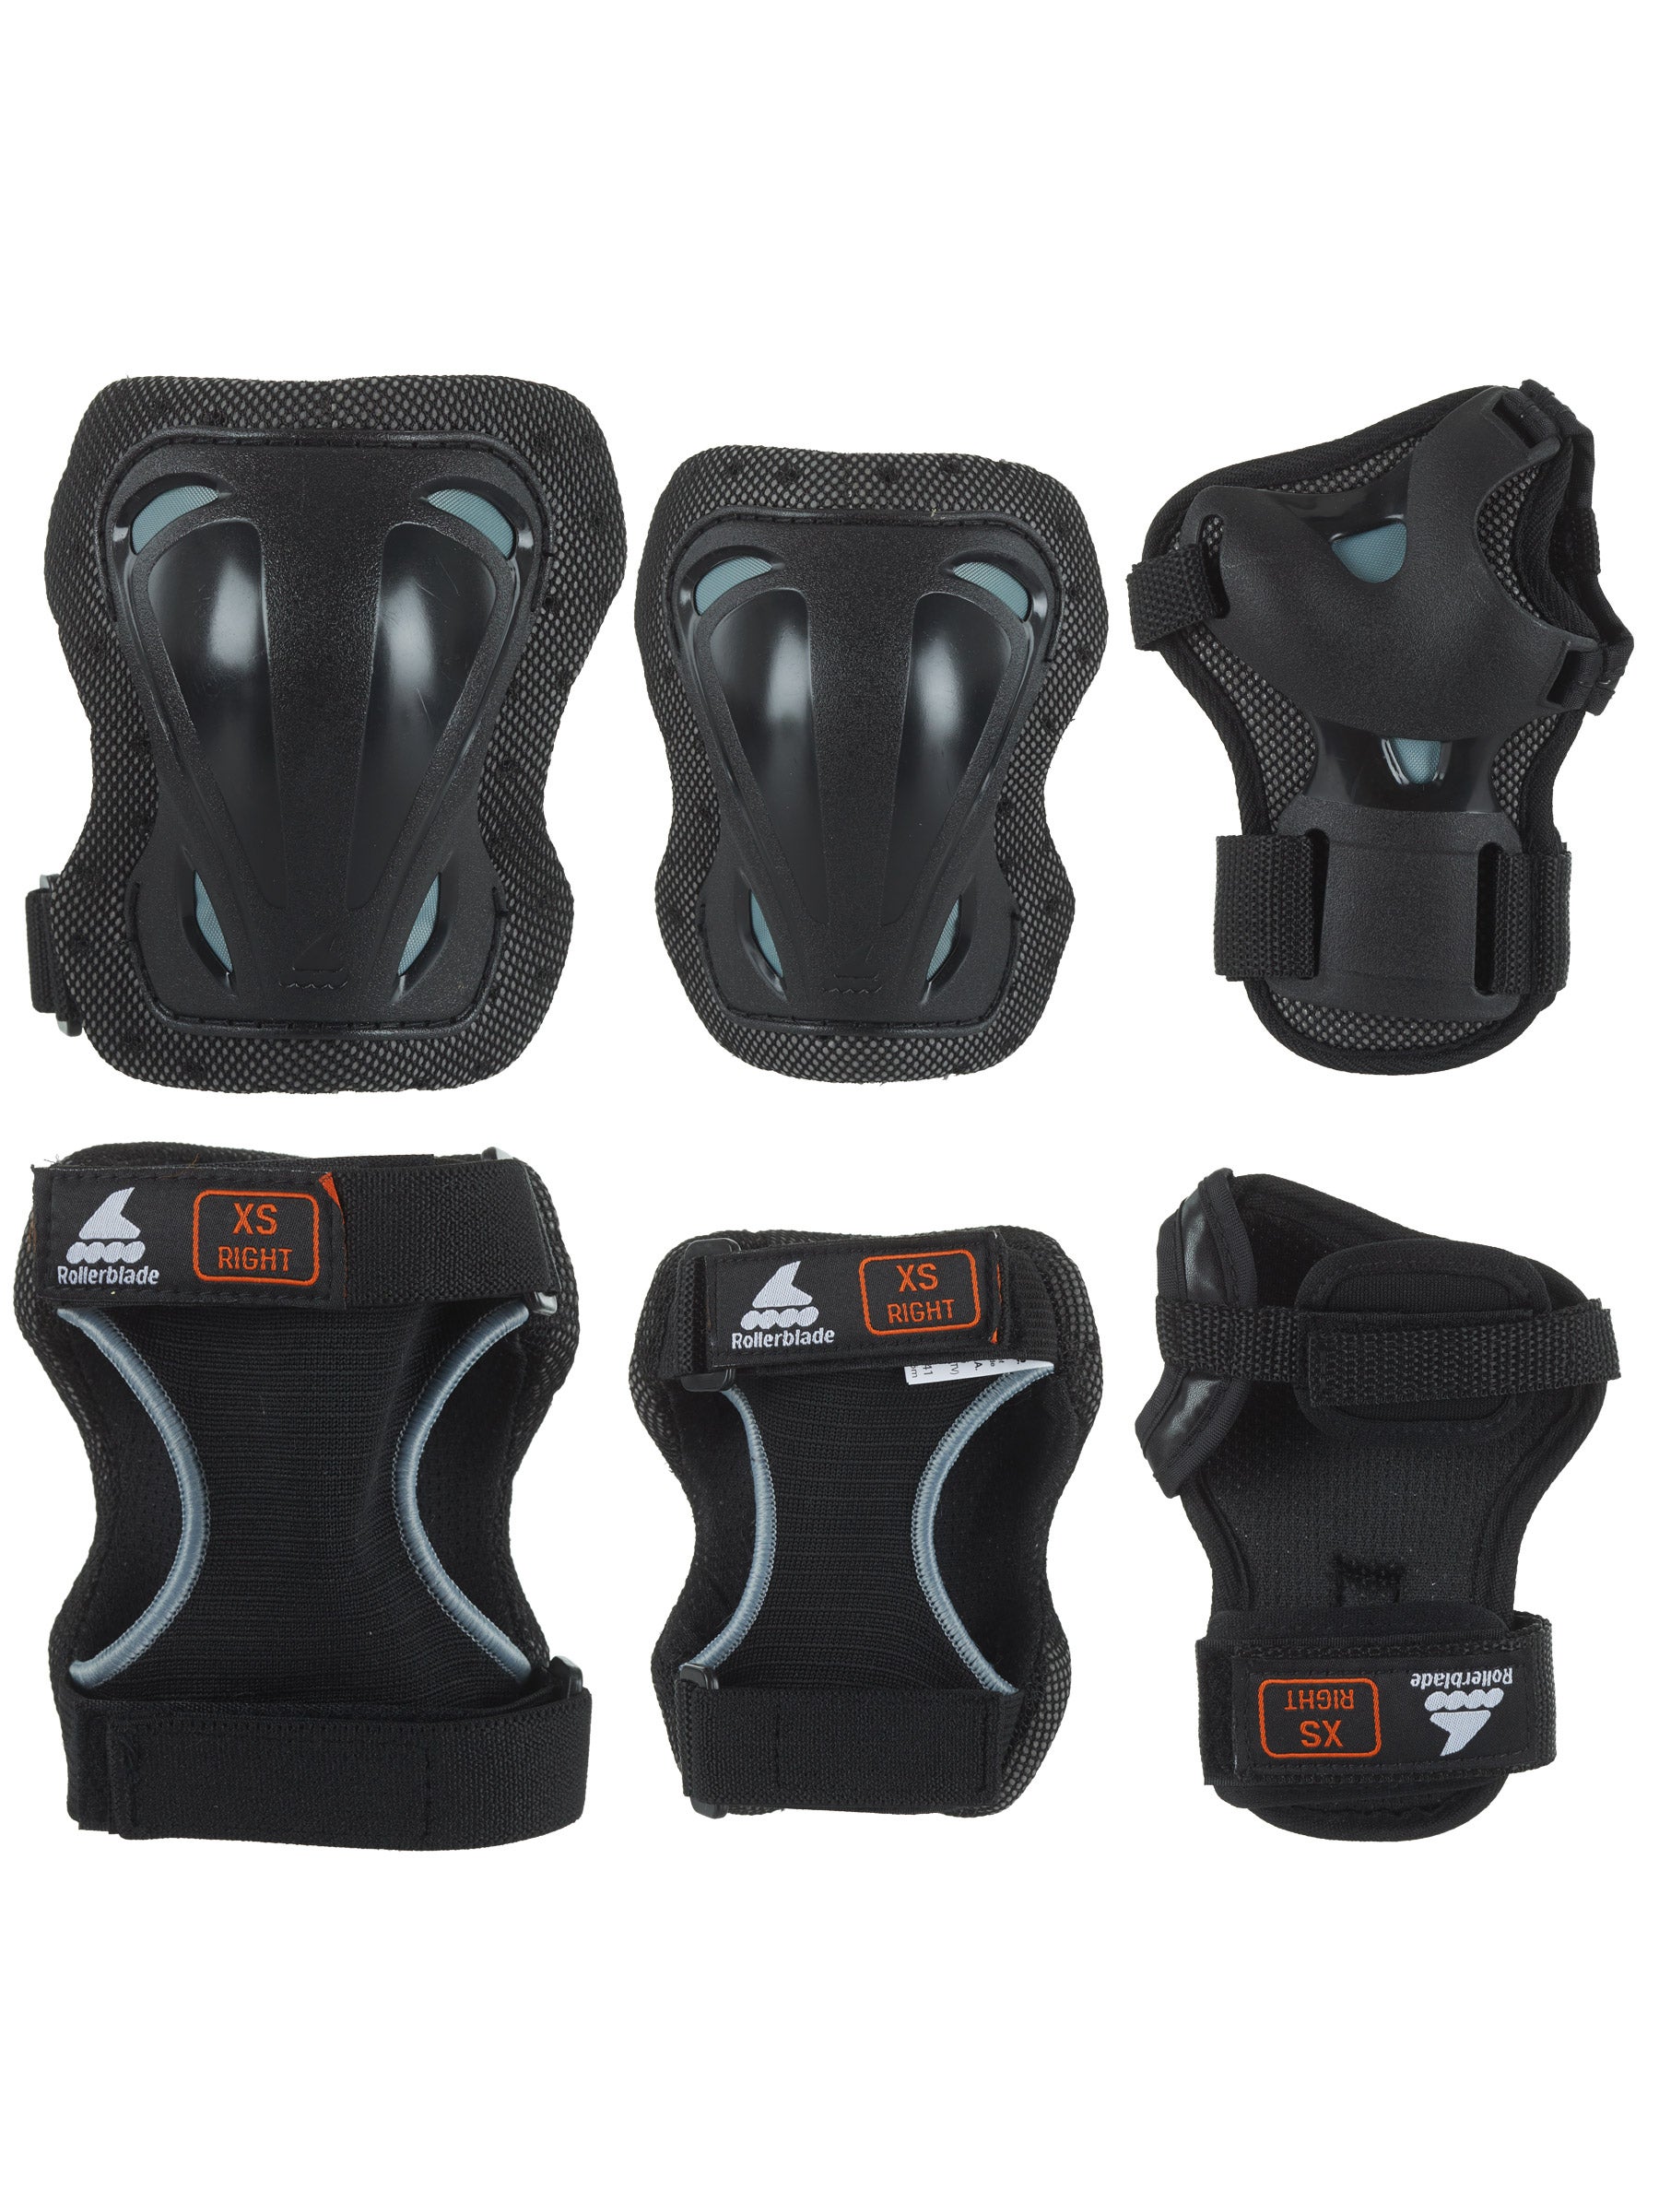 Inline Skating Rollerblade Skate Gear 3 Pack Protective Gear Elbow Pads and Wrist Guards Unisex Multi Sport Protection Black Knee Pads